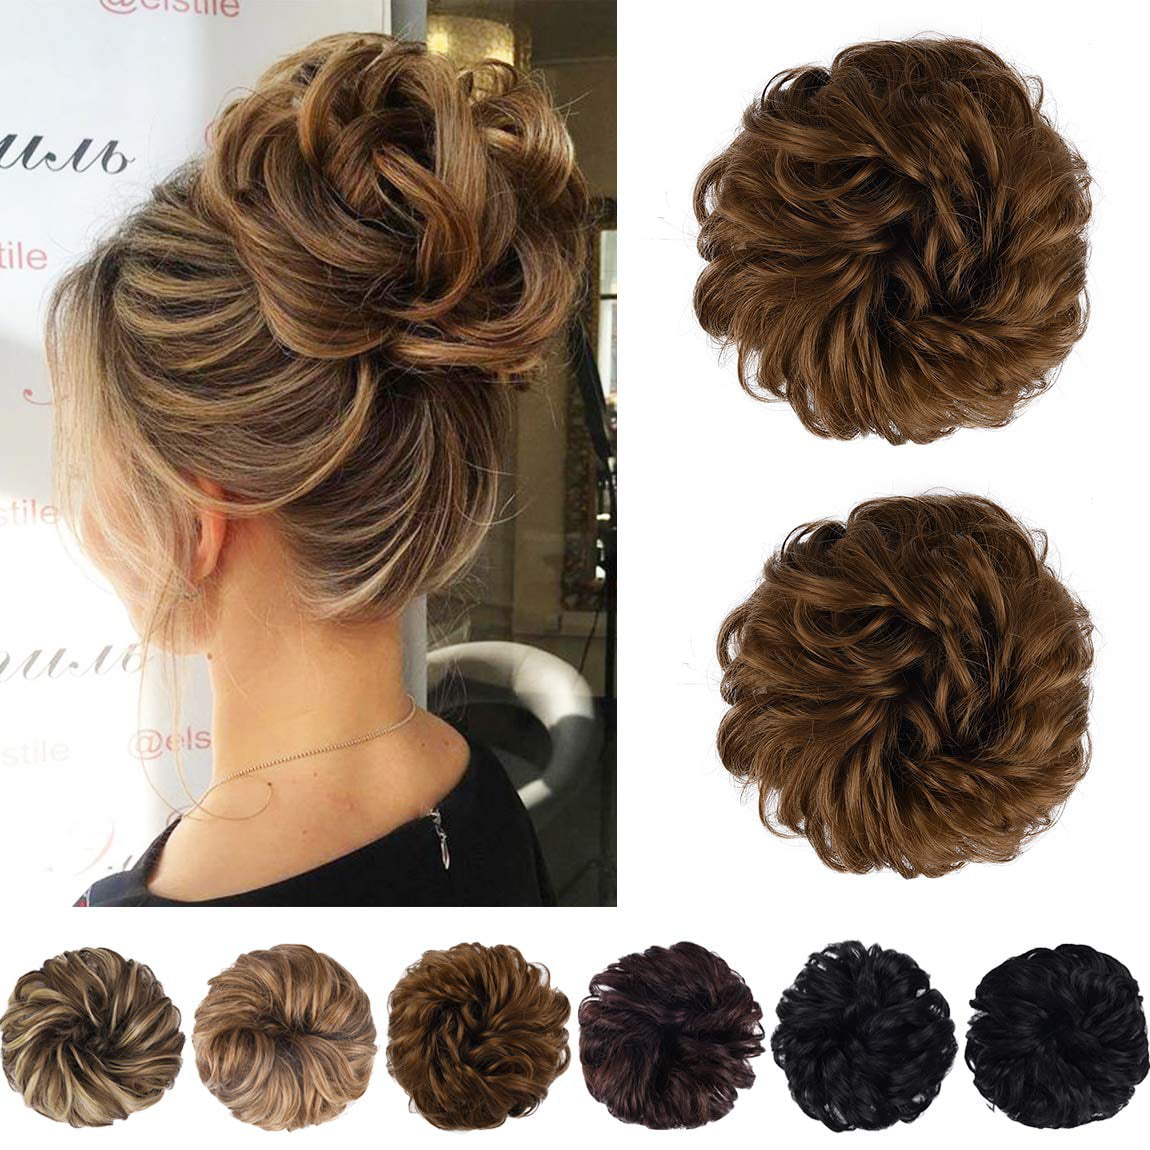 XLarge Messy Bun Hairpiece Scrunchie Updo Ponytail Real Natural Hair  Extensions  eBay